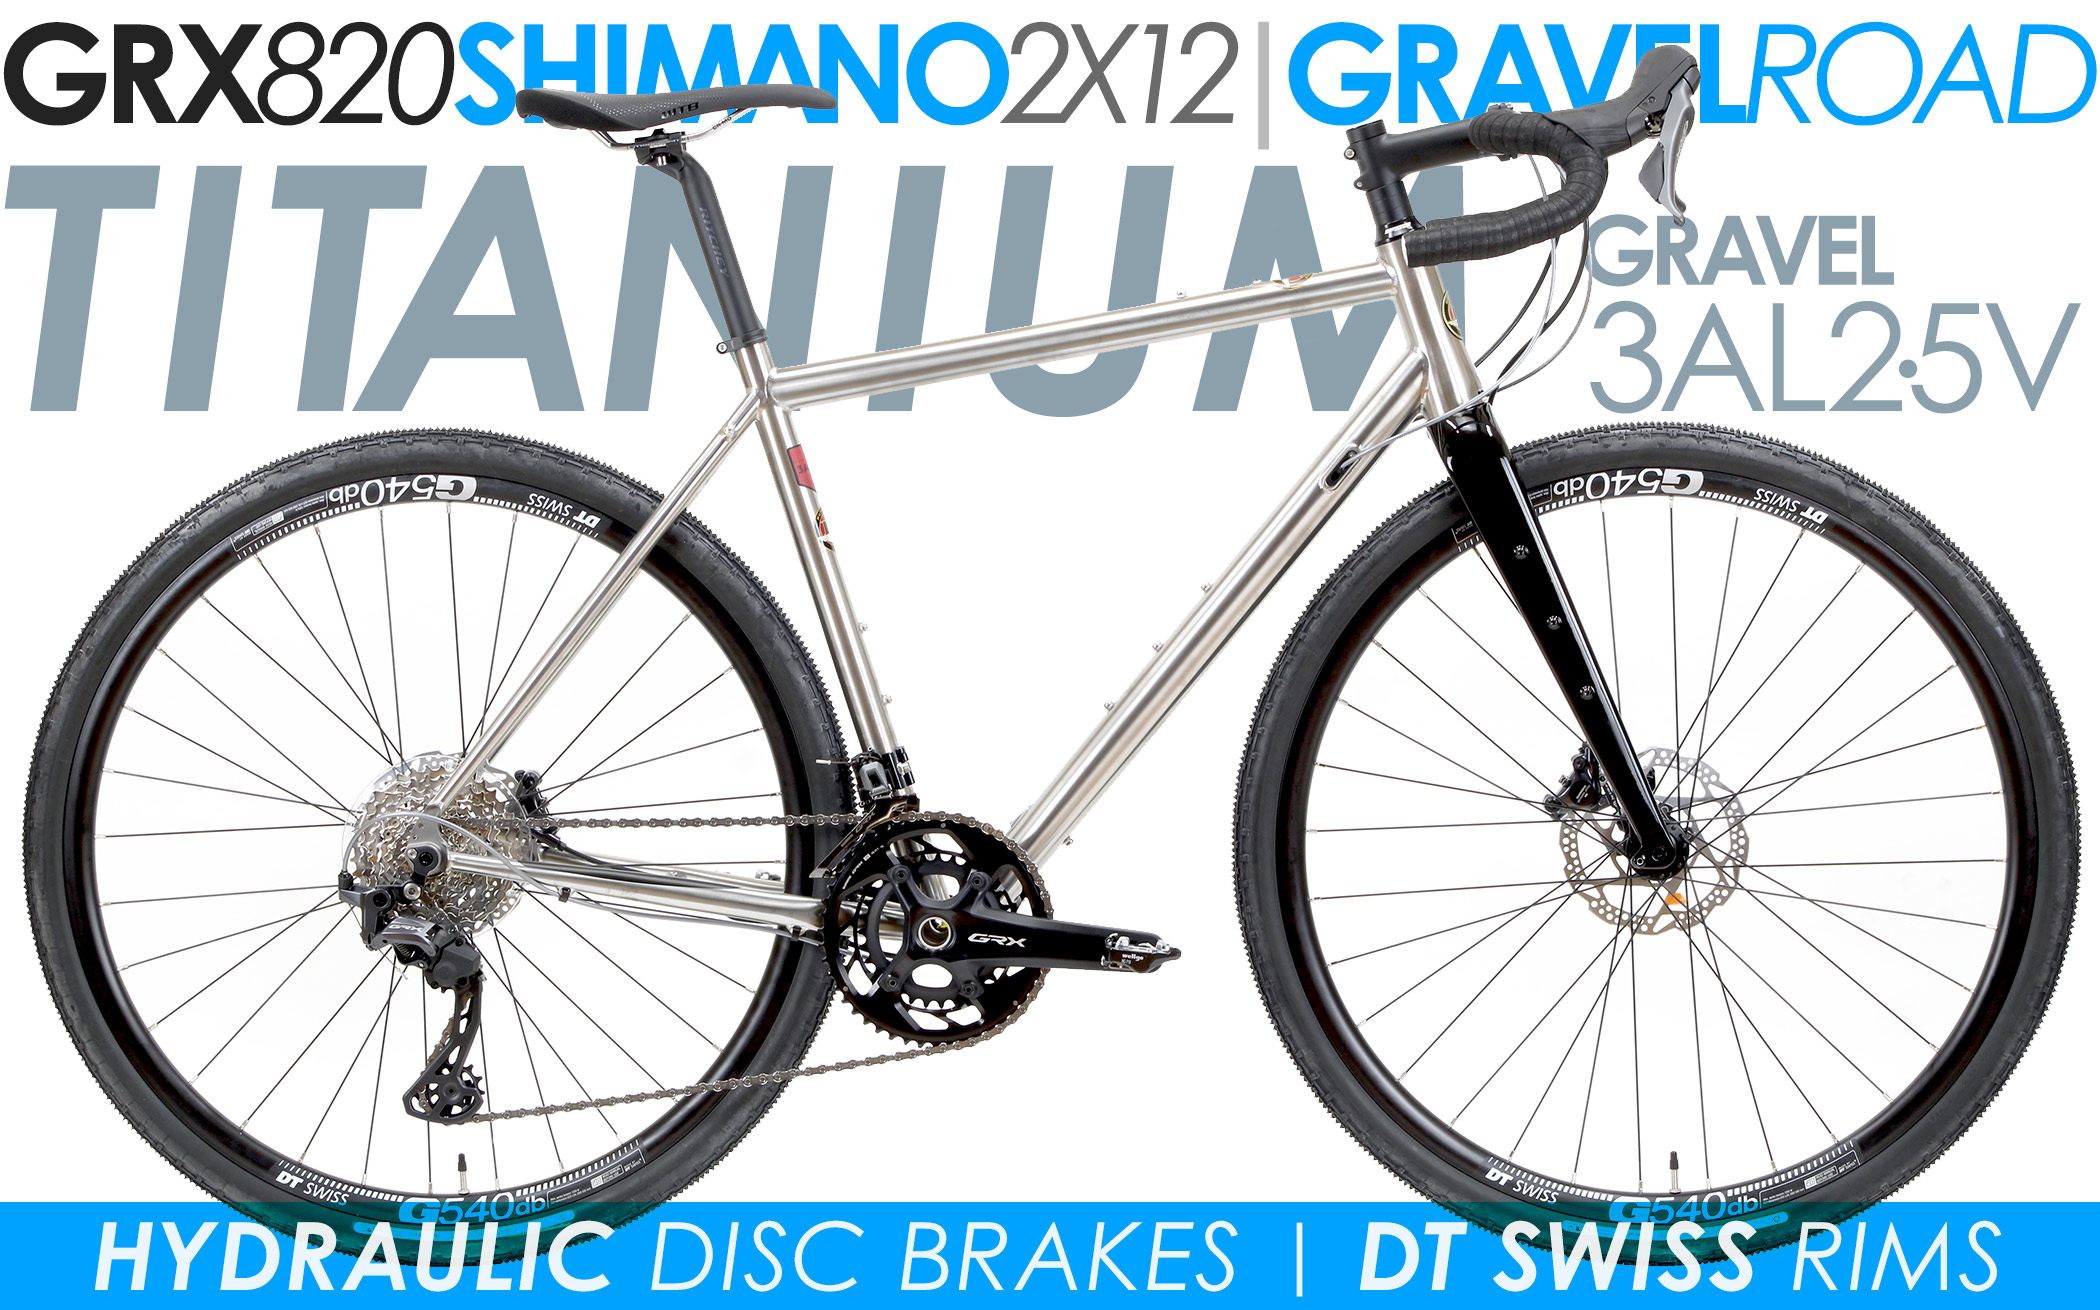 *ALL BIKES FREE SHIP 48 Fast Titanium Wide Tire Endurance Road Bikes
Motobecane Mulekick Ti PRO Disc GRX820, DT SWISS Wheelset, Full Carbon Forks, Shimano New Gravel Specific GRX 820 2X12 Speed, Competition Proven, FULL Shimano GRX GravelSpecific, GRX 820 Components, Hydraulic Disc Brakes Riding